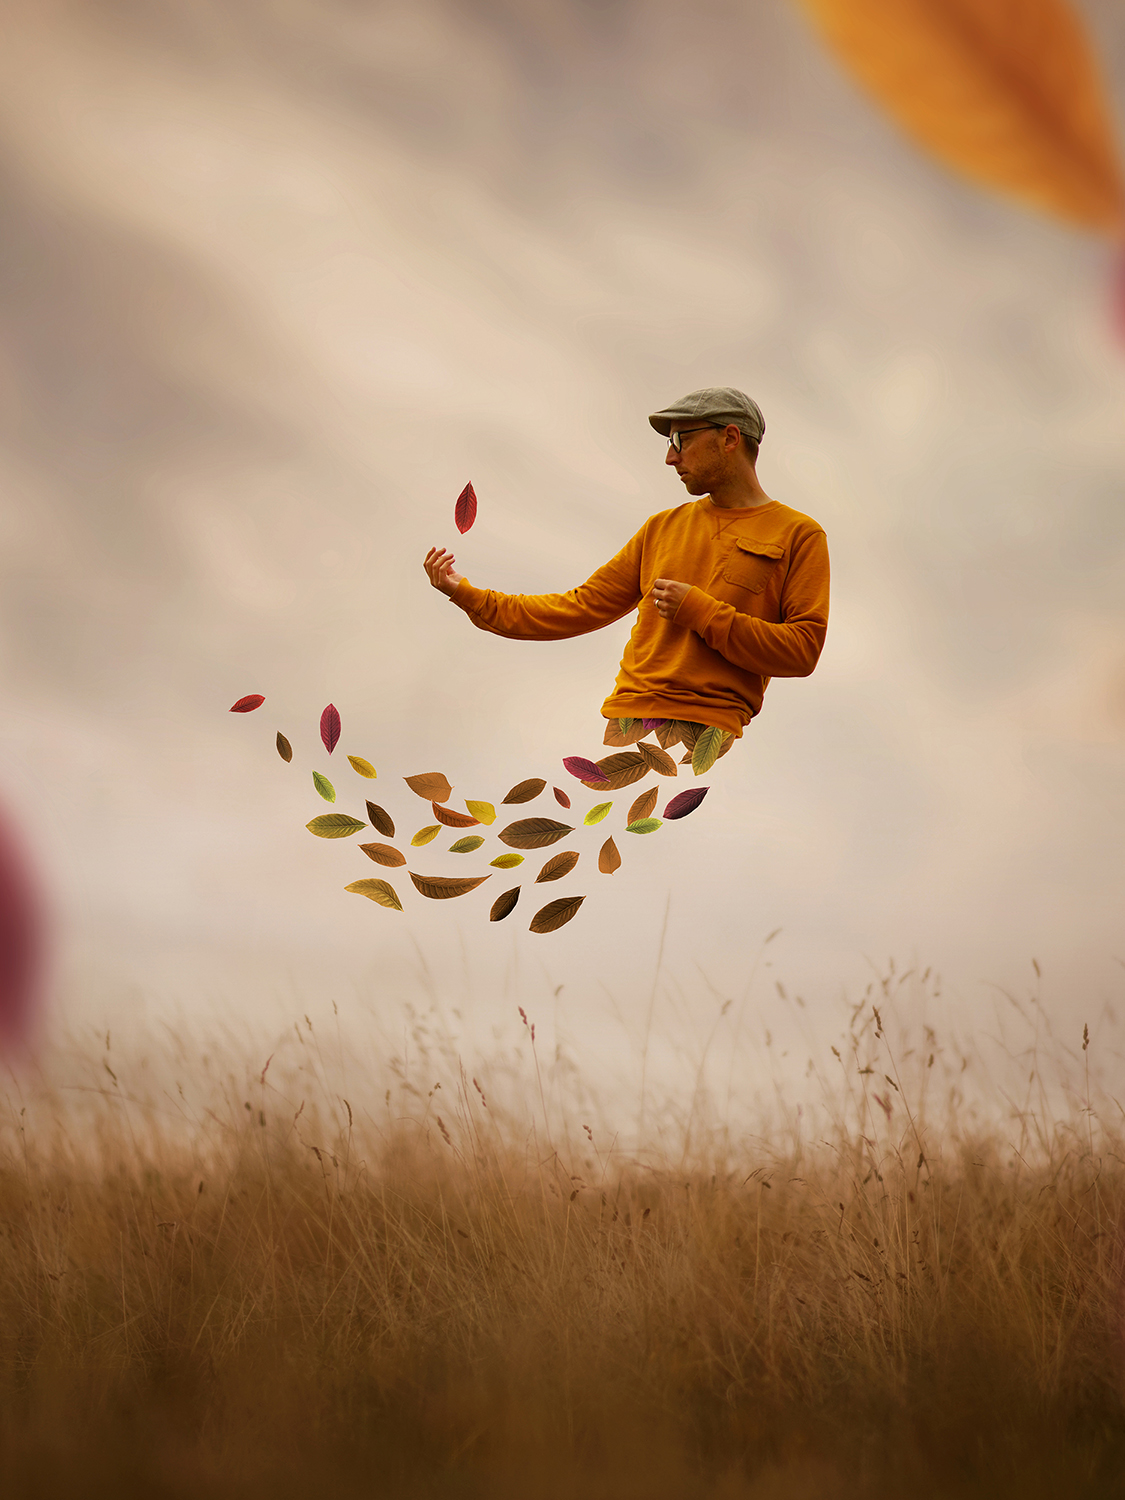 Male subject moves through the air with autumn leaves falling out of his shirt